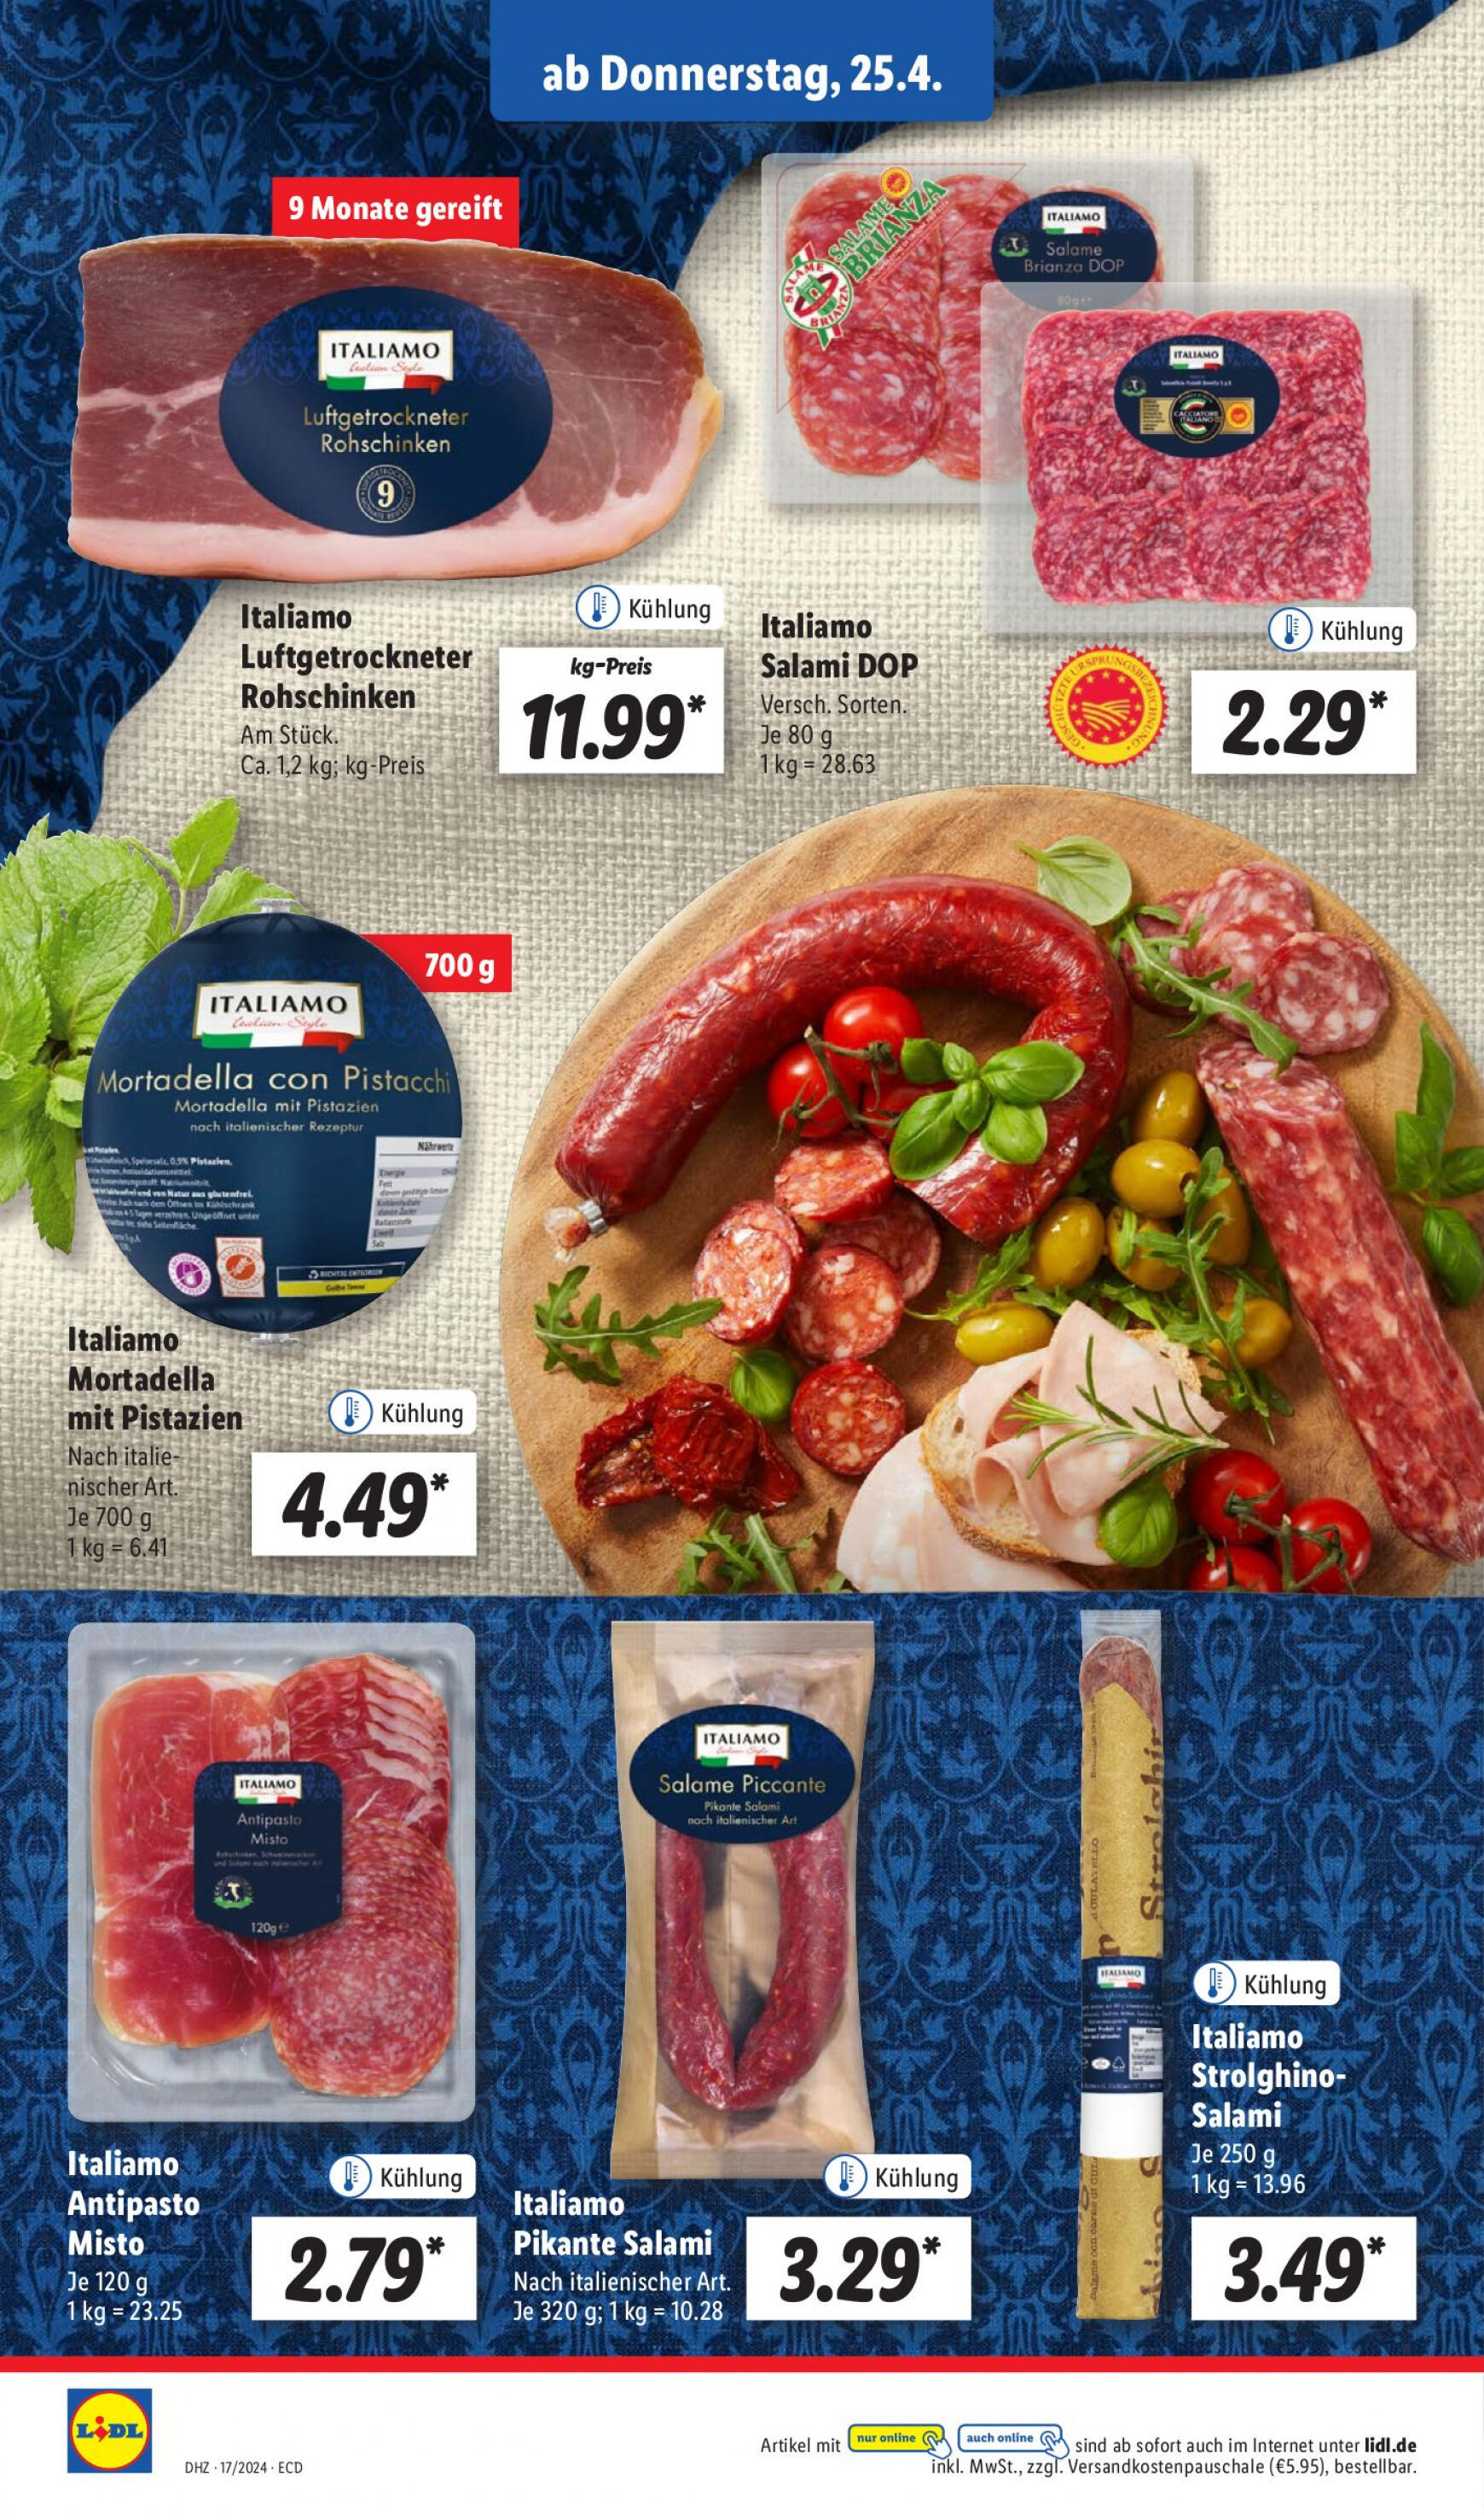 lidl - Flyer Lidl aktuell 22.04. - 27.04. - page: 46